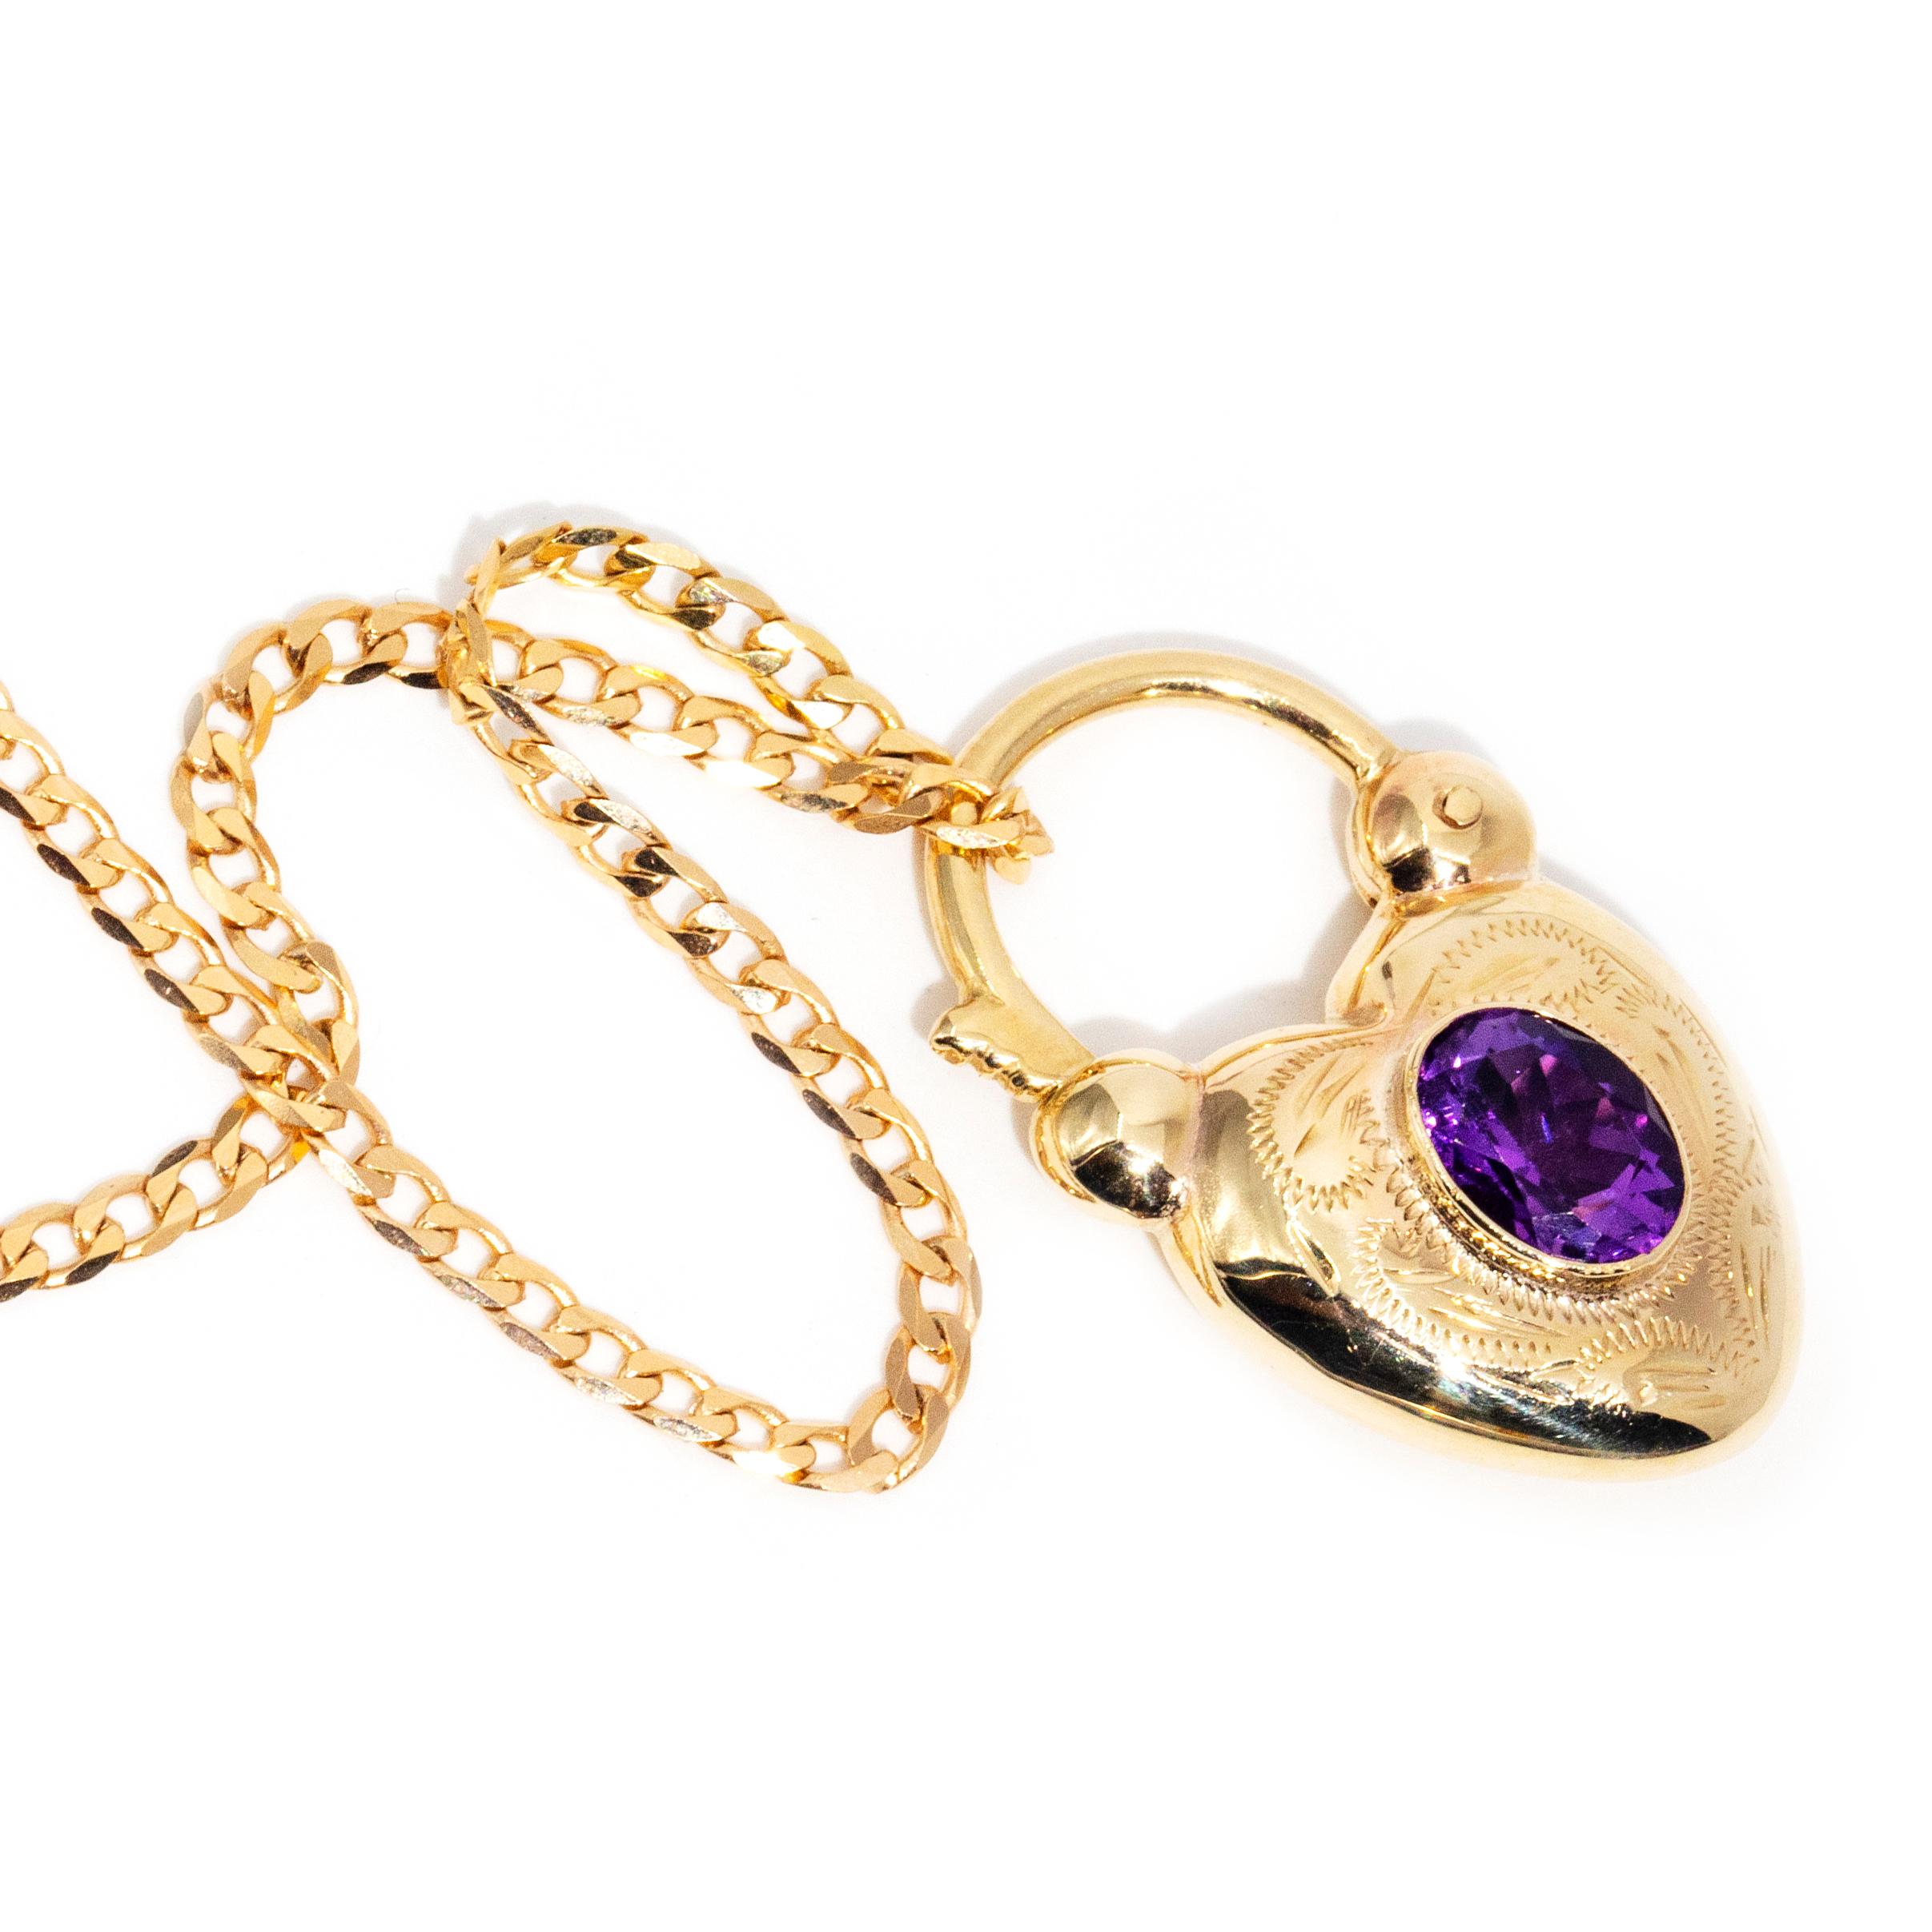 Vintage Circa 1970s Amethyst Heart Shaped Pendant & Chain 9 Carat Yellow Gold  For Sale 3